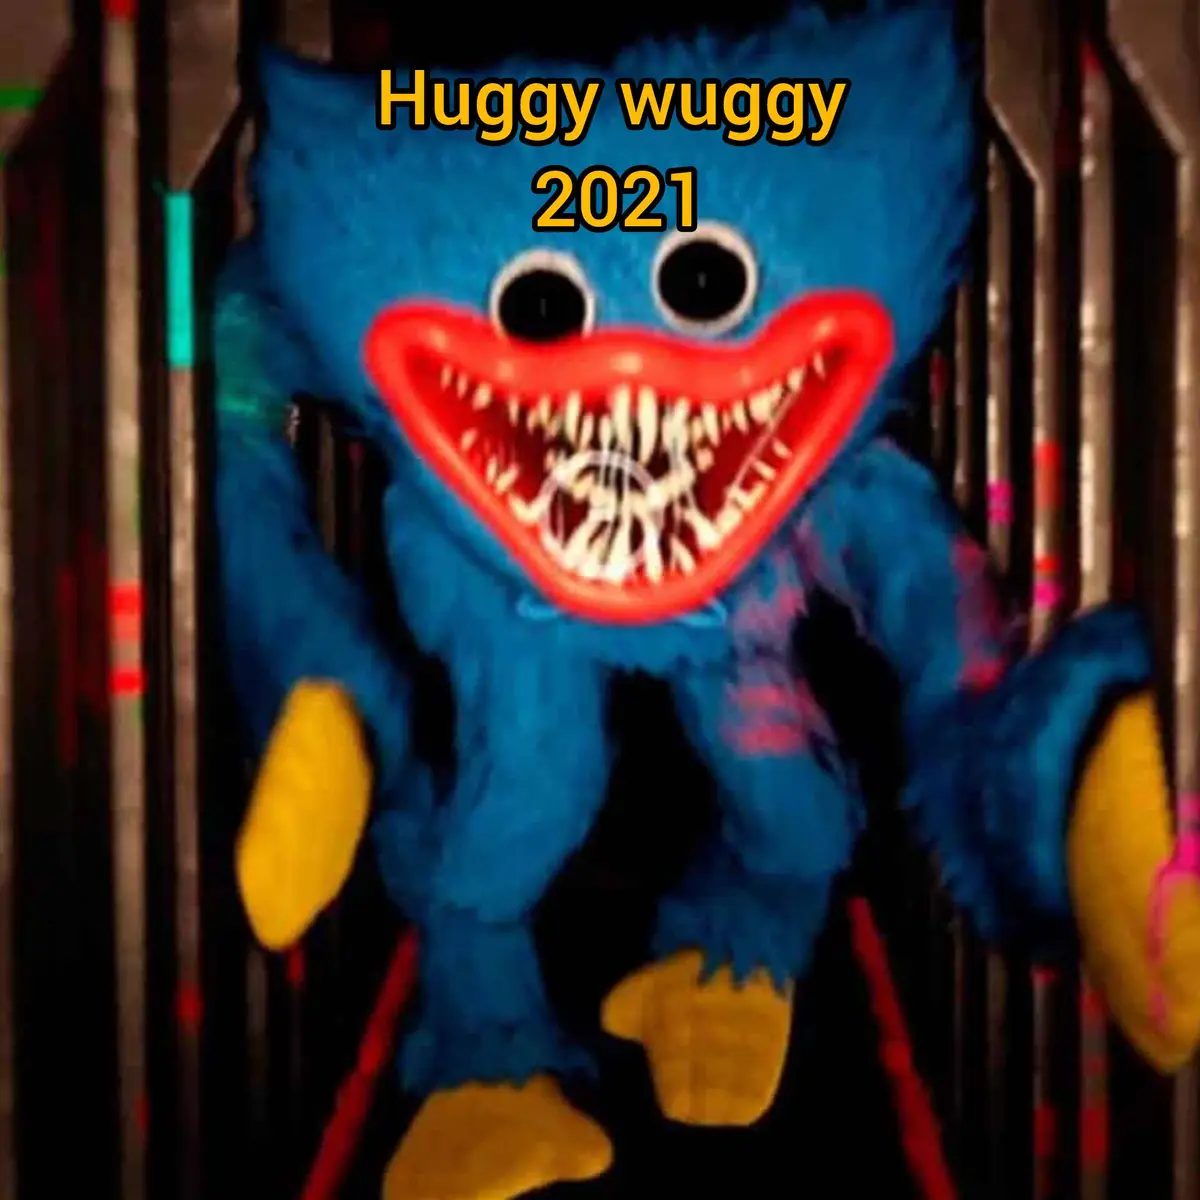 huggy wuggy 2021 2024 me quedo sin ideas#poppy playtime 